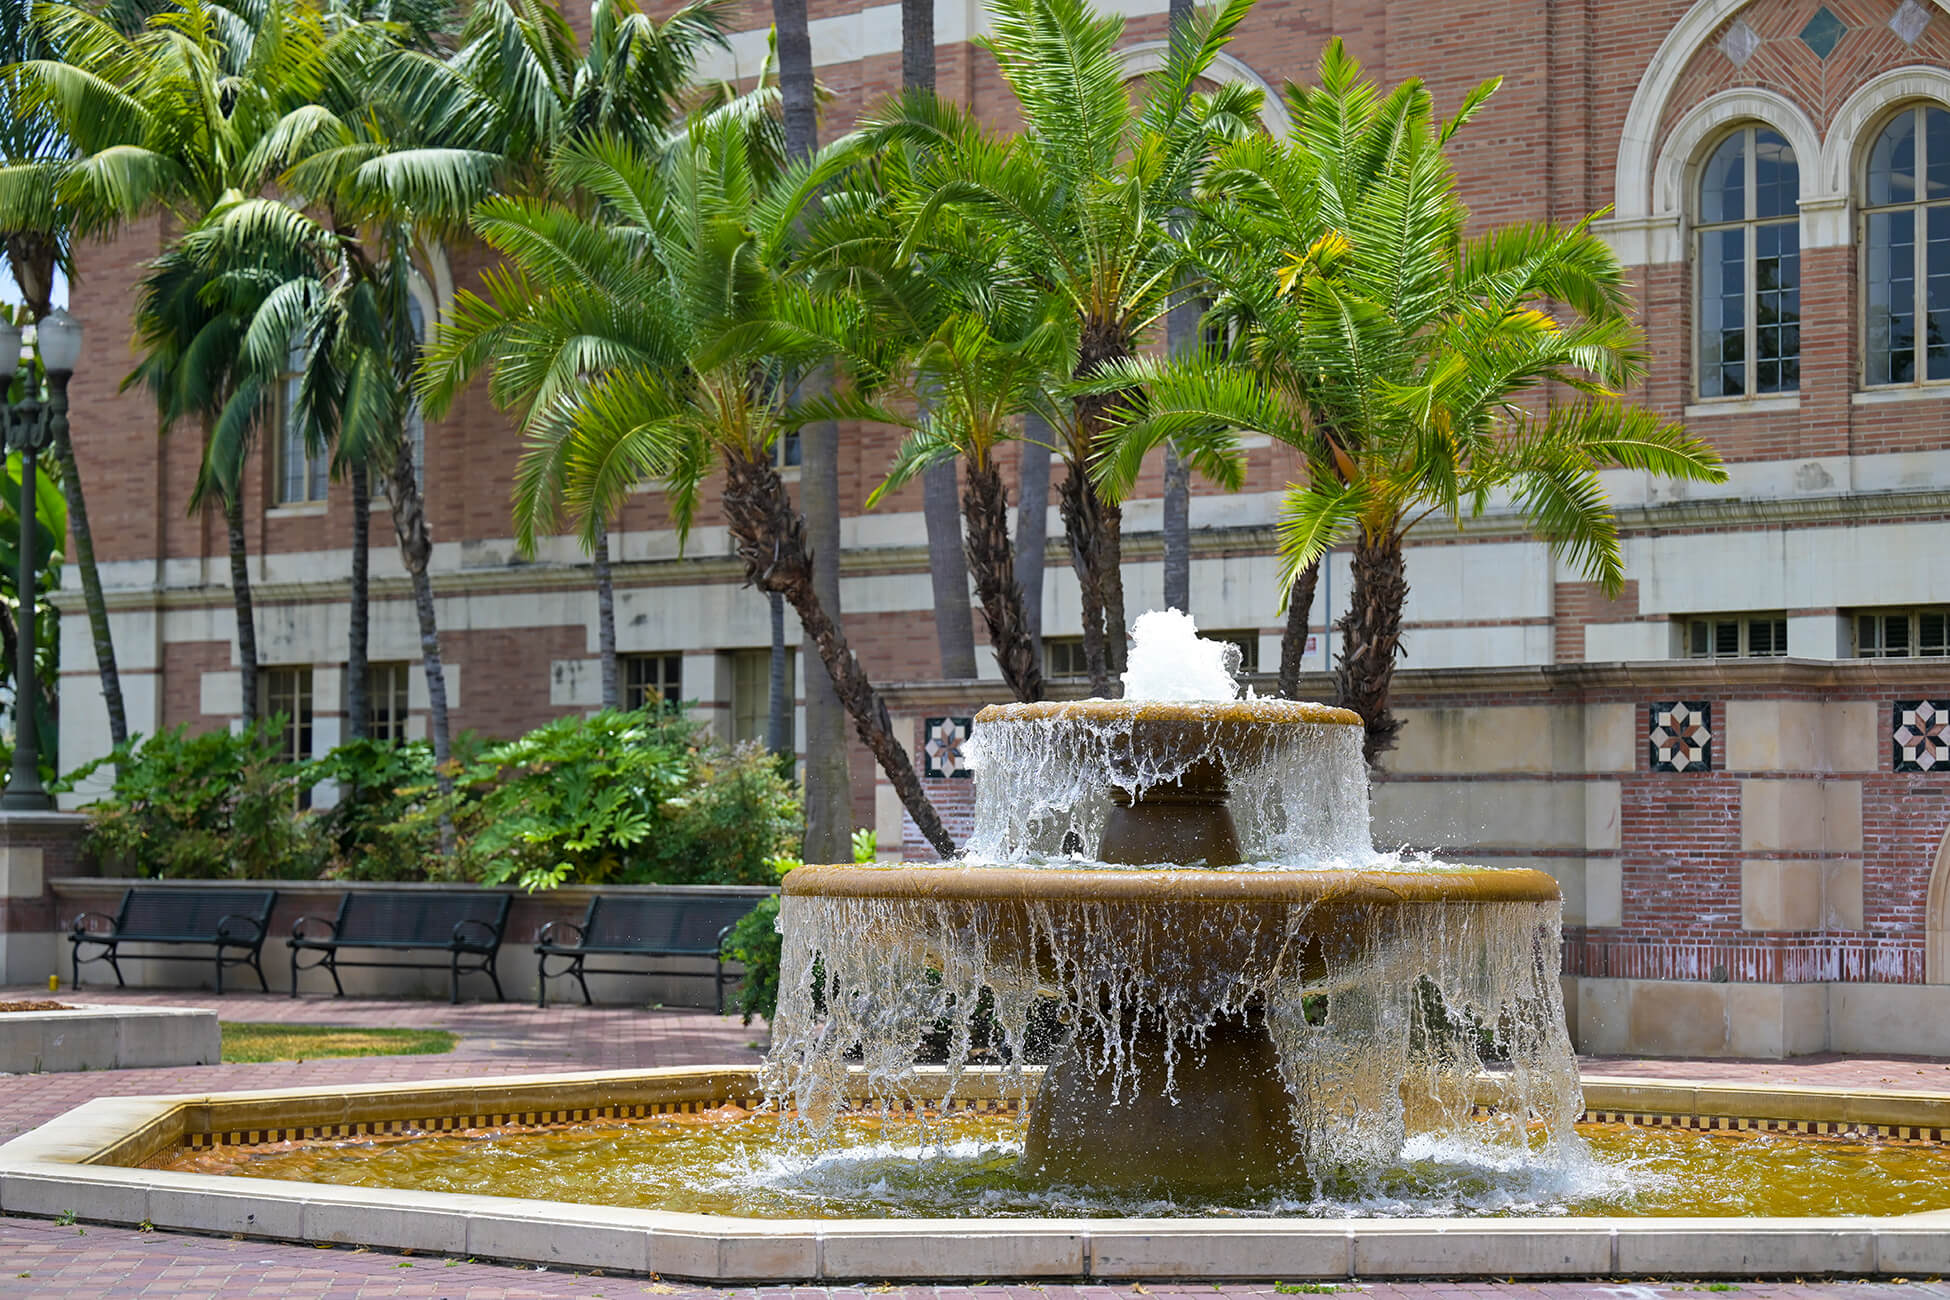 McCarthy Quad’s large, two-tiered fountain at the center of the Carolyn Craig Franklin Library Garden Courtyard